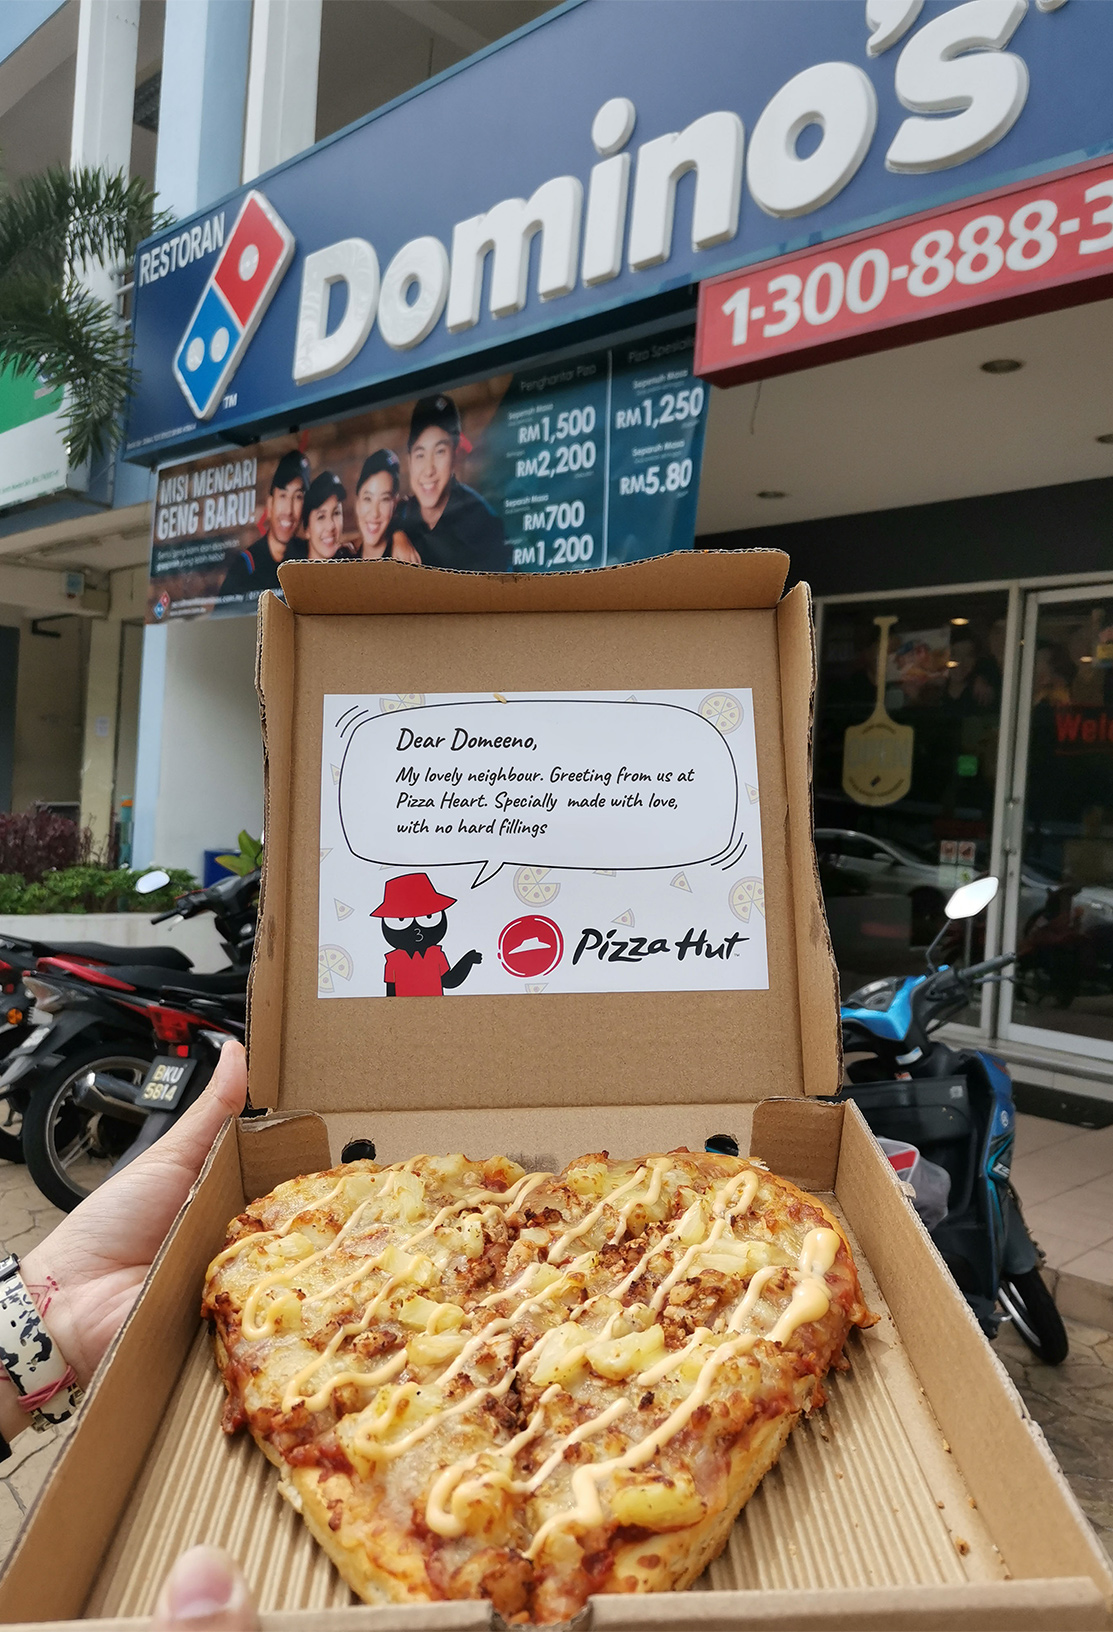 Delivery to Domino's